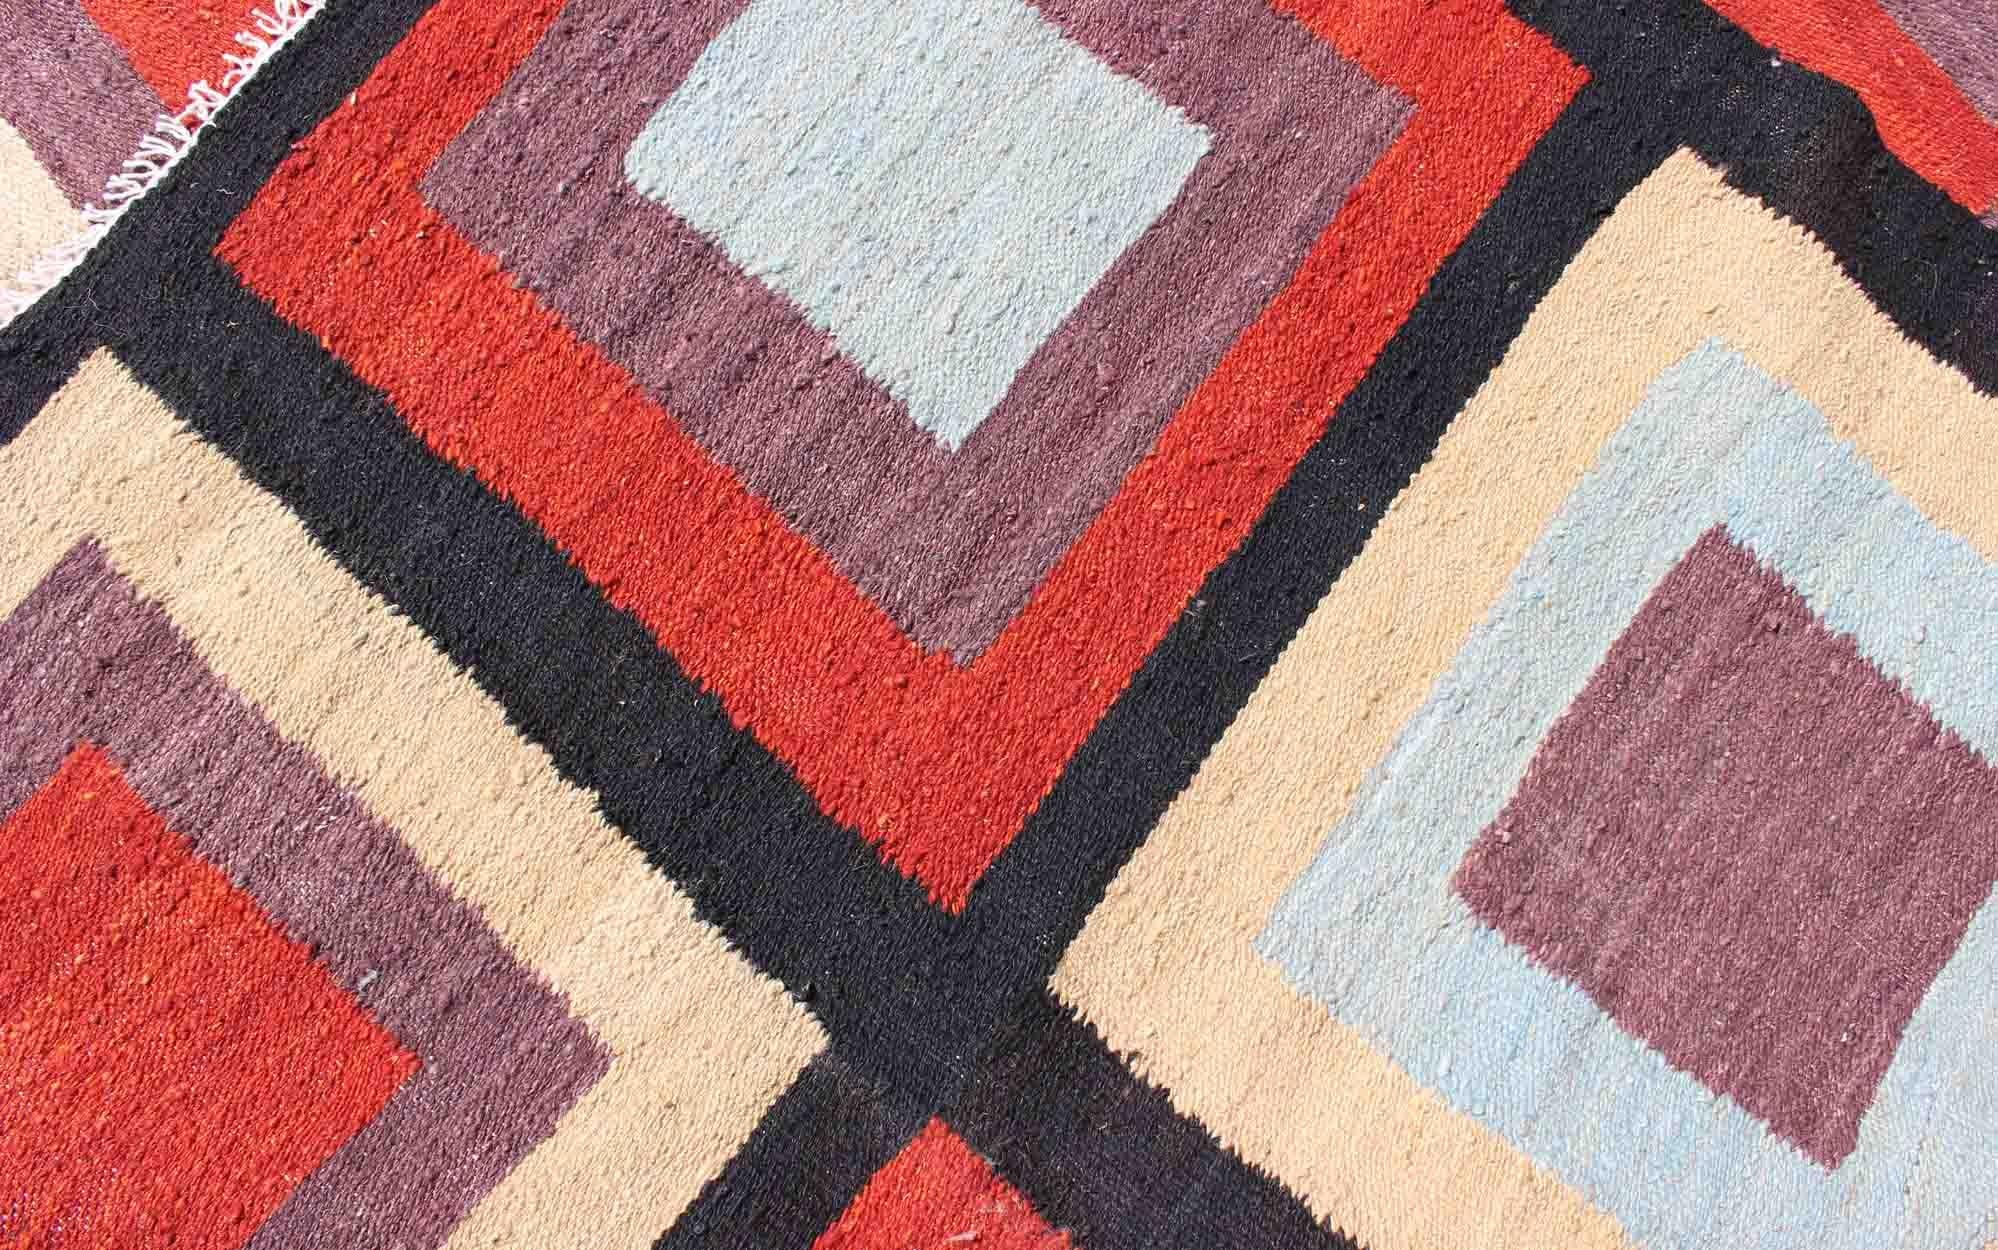 Large Modern Kilim Rug with Squared Design in Red, Blue, Black, Cream, Purple 4